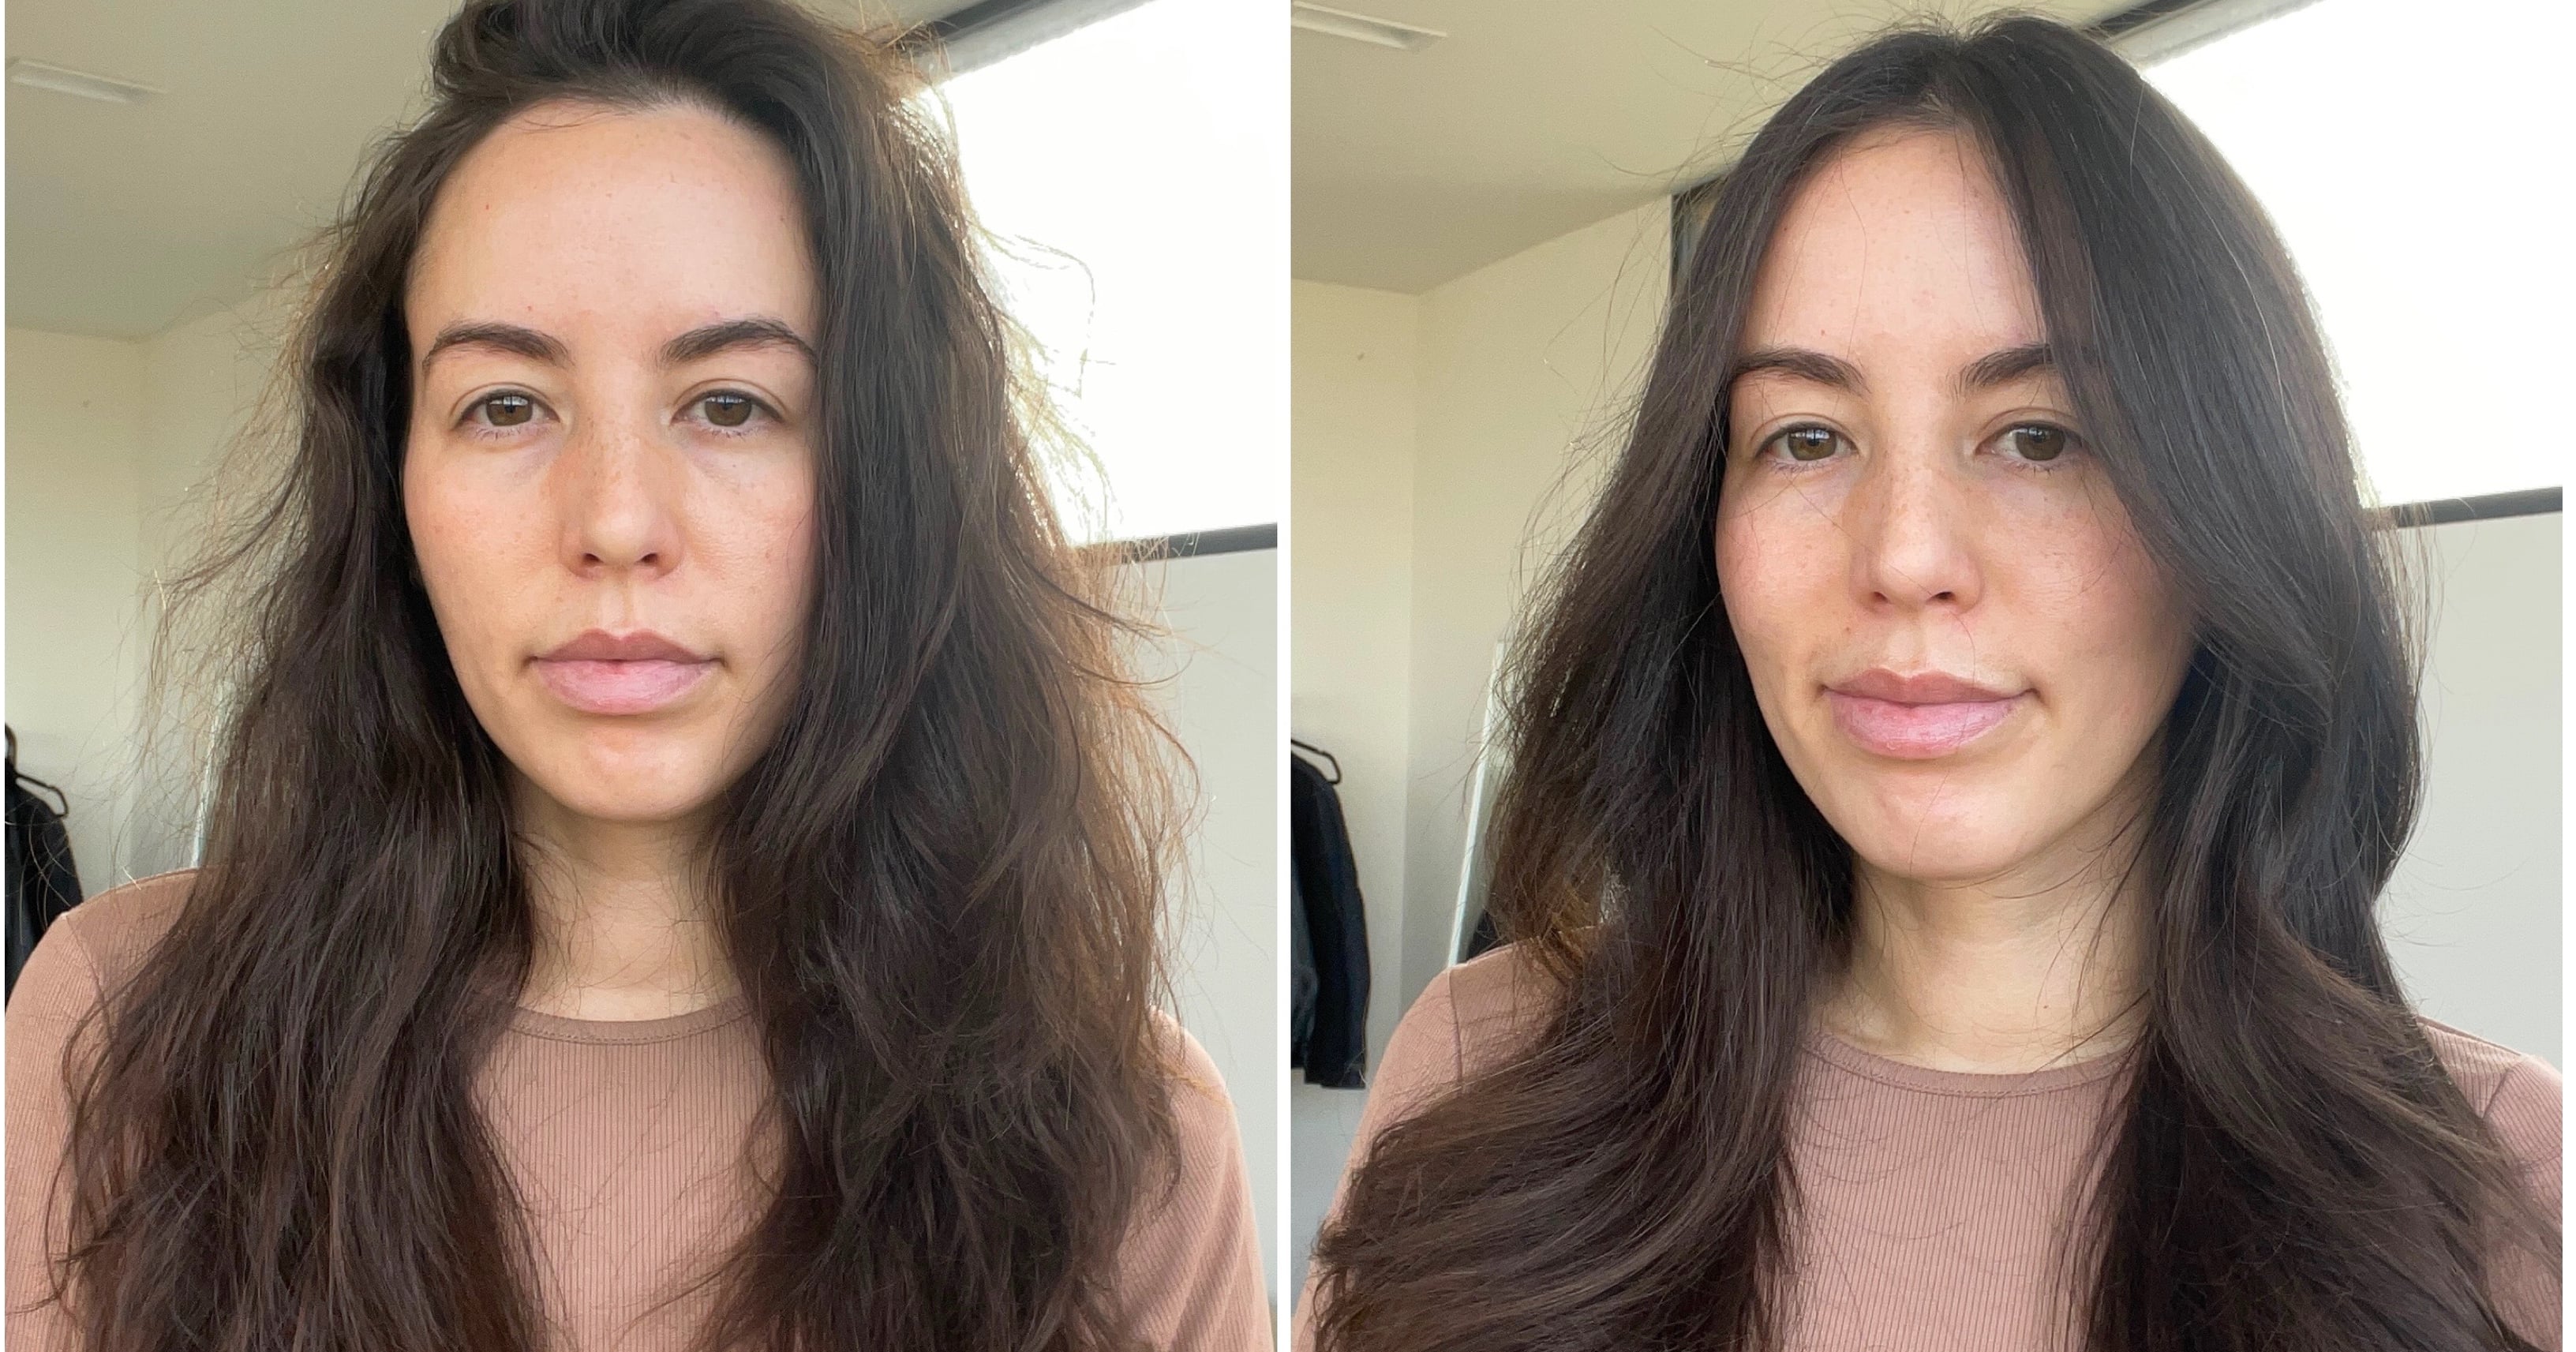 This Styling Tool Took My Hair From Frizzy to Full in 10 Minutes Flat